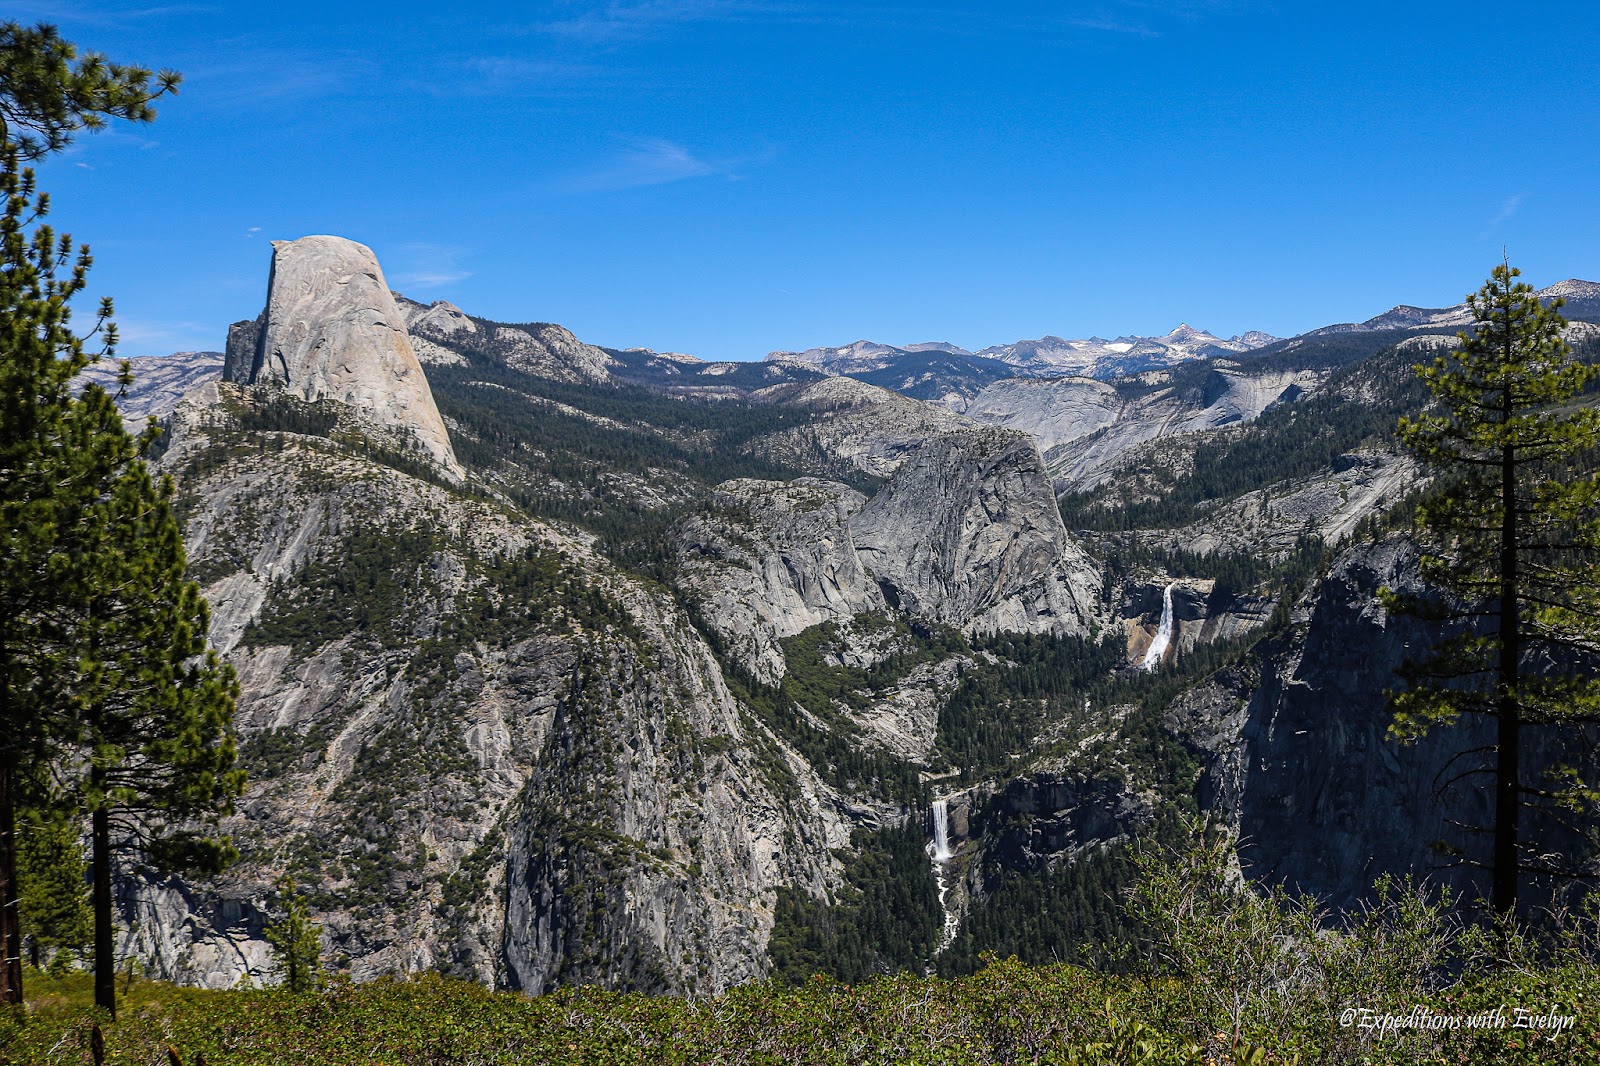 A panoramic view of Yosemite icons - Half Dome, Vernal Fall and Nevada Fall.